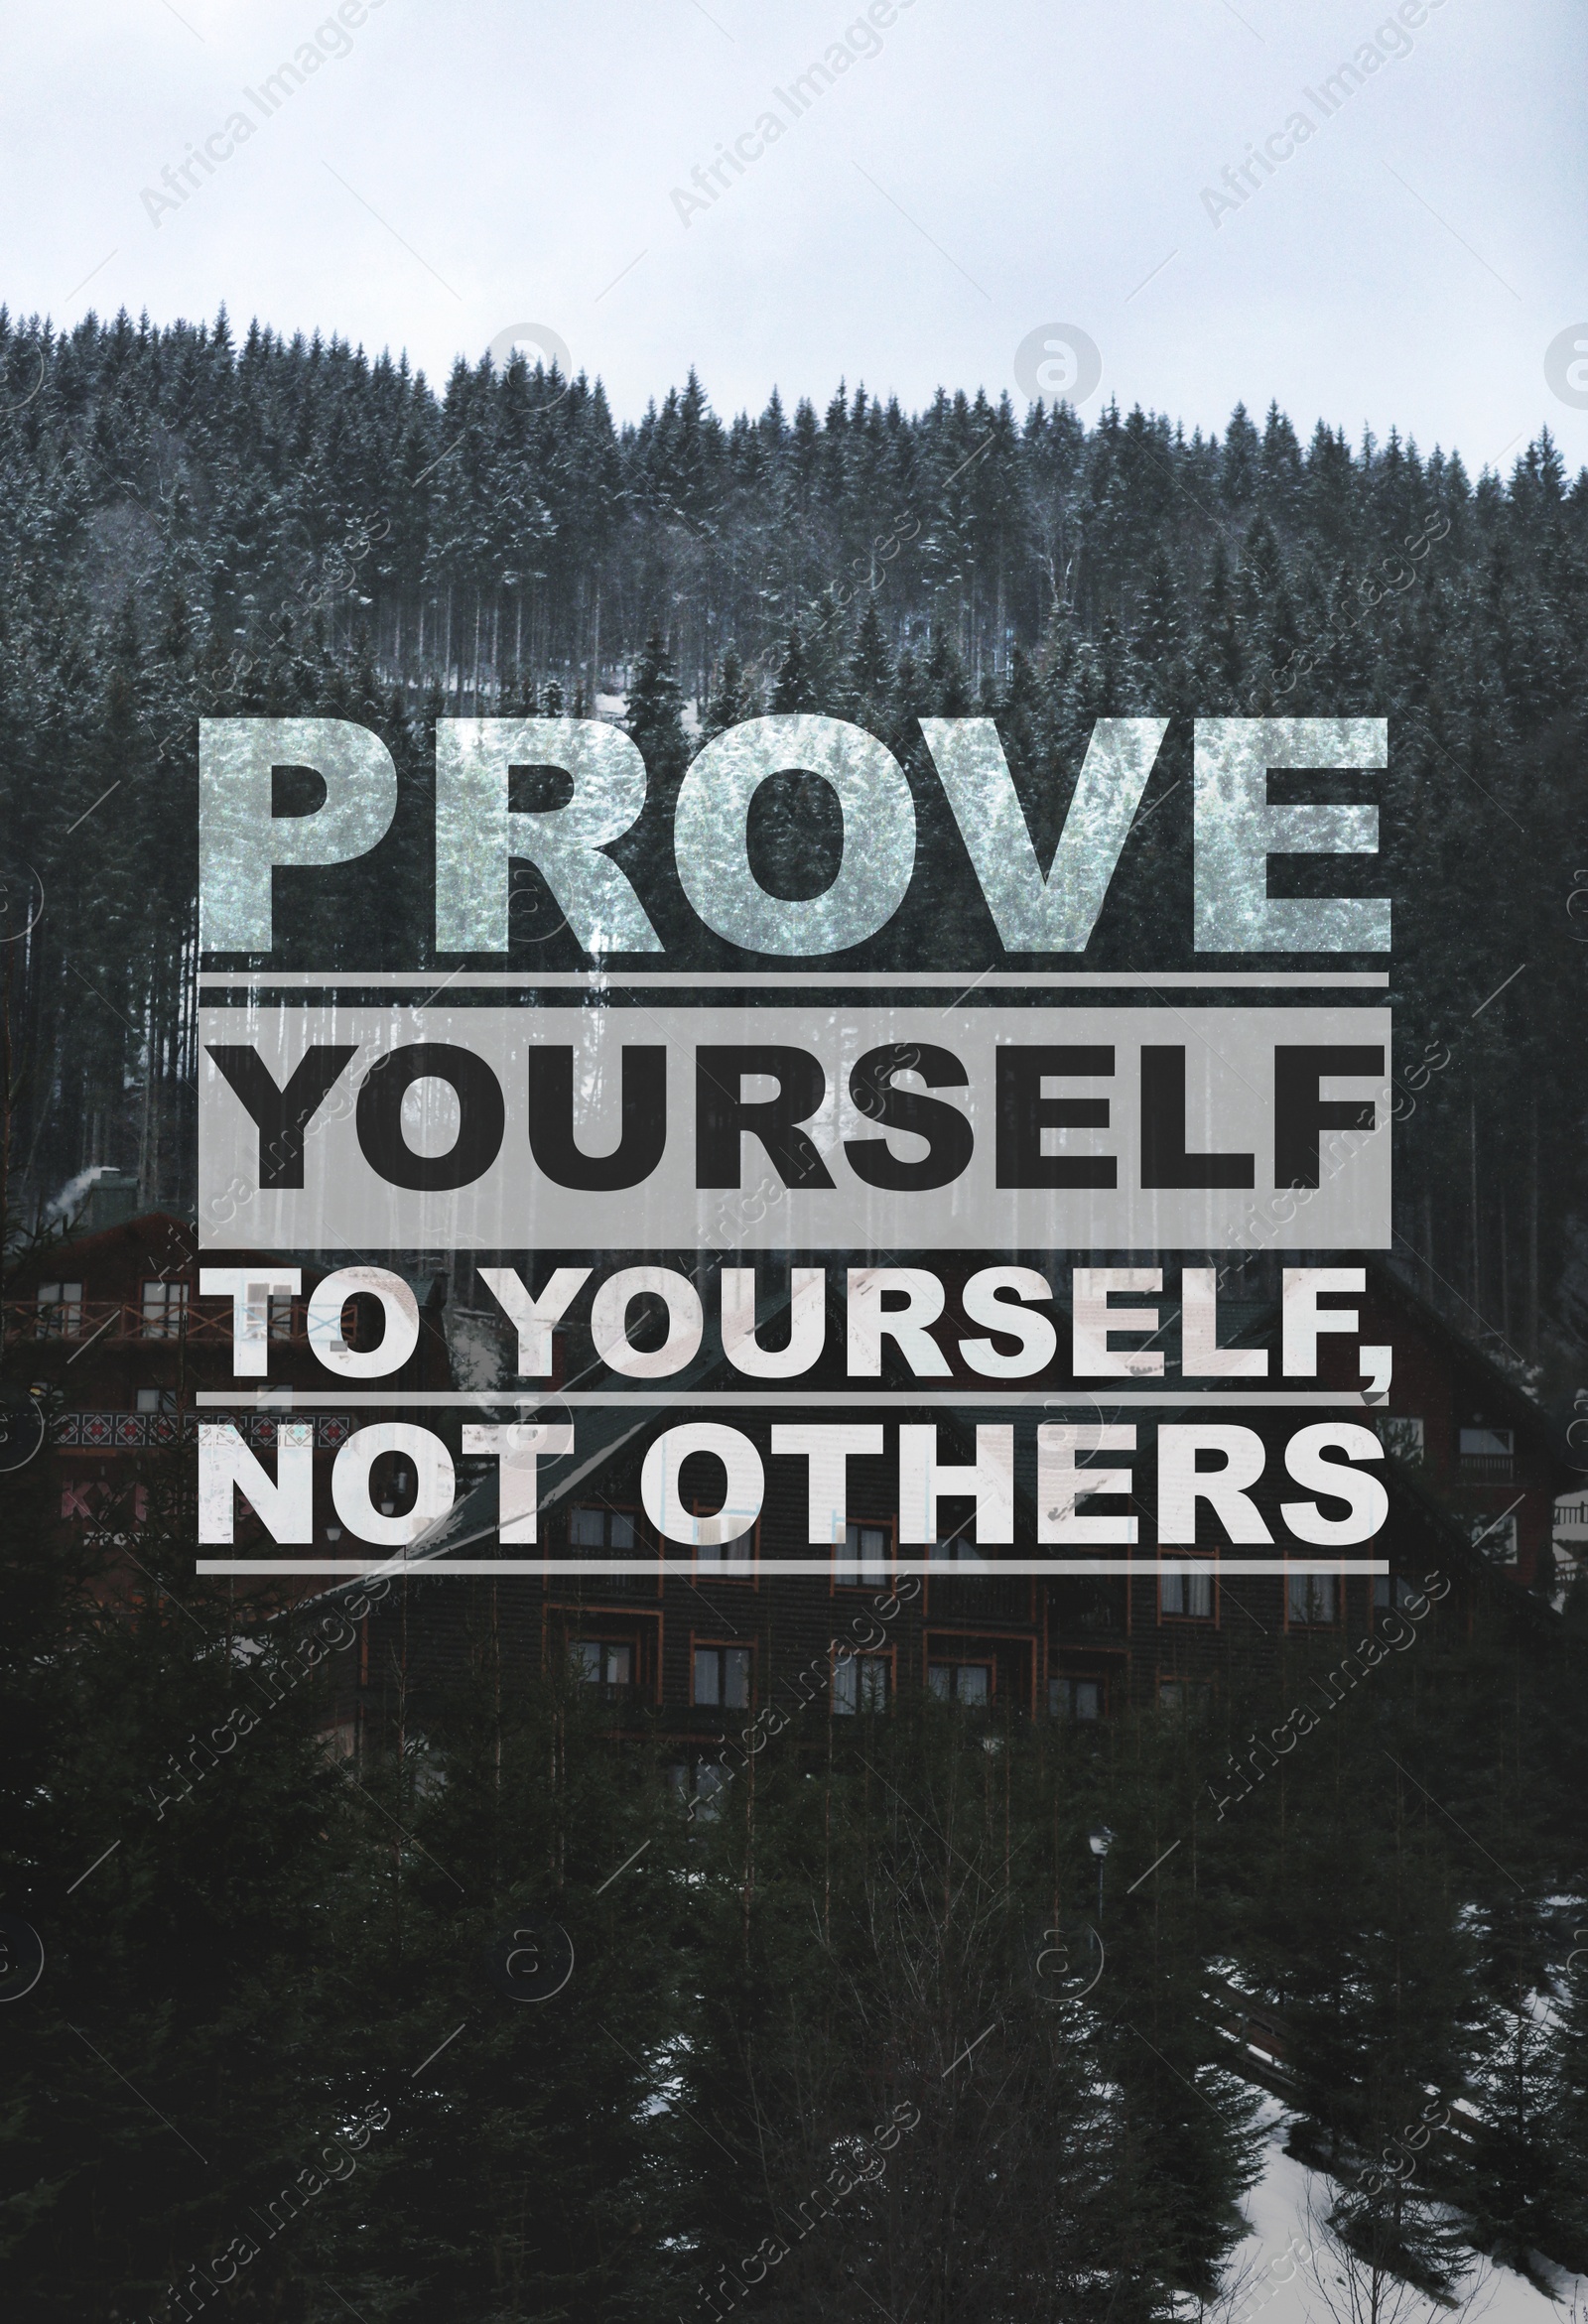 Image of Prove Yourself To Yourself, Not Others. Motivational quote saying that person is already valuable and doesn't need to be validated by the rest of the people. Text against mountain landscape